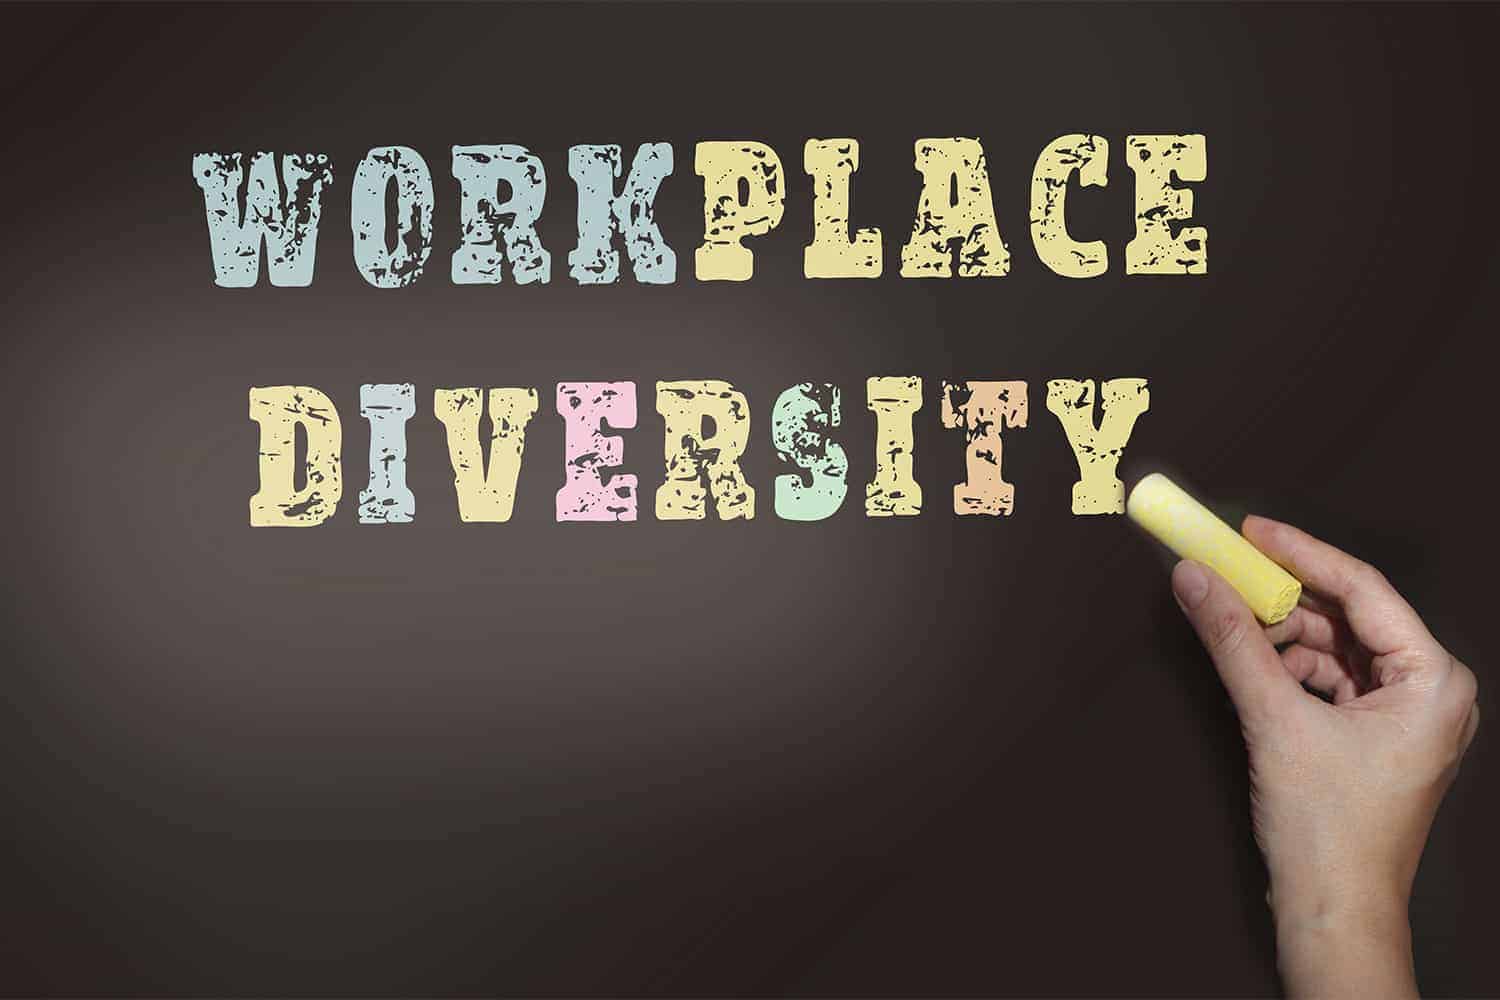 A hand holding a piece of chalk against a chalkboard, with the words "workplace diversity" written in colorful, distressed font style.